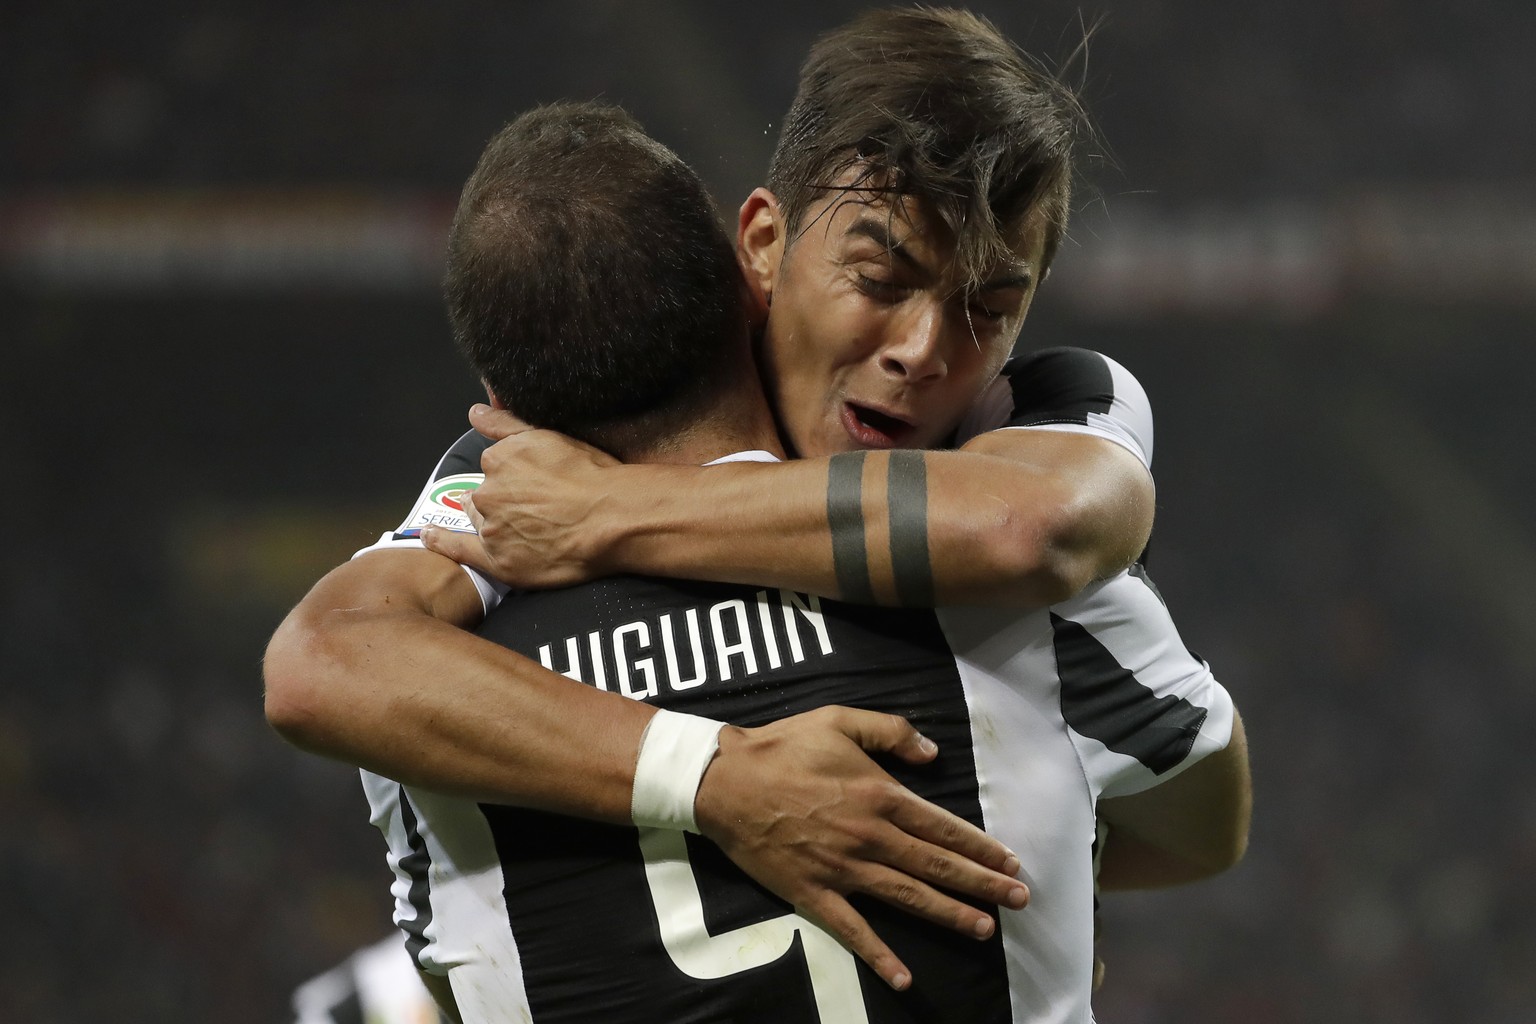 Juventus&#039; Paulo Dybala hugs teammate Gonzalo Higuain who scored his side&#039;s first goal during a Serie A soccer match between AC Milan and Juventus, at the Milan San Siro stadium, Italy, Satur ...